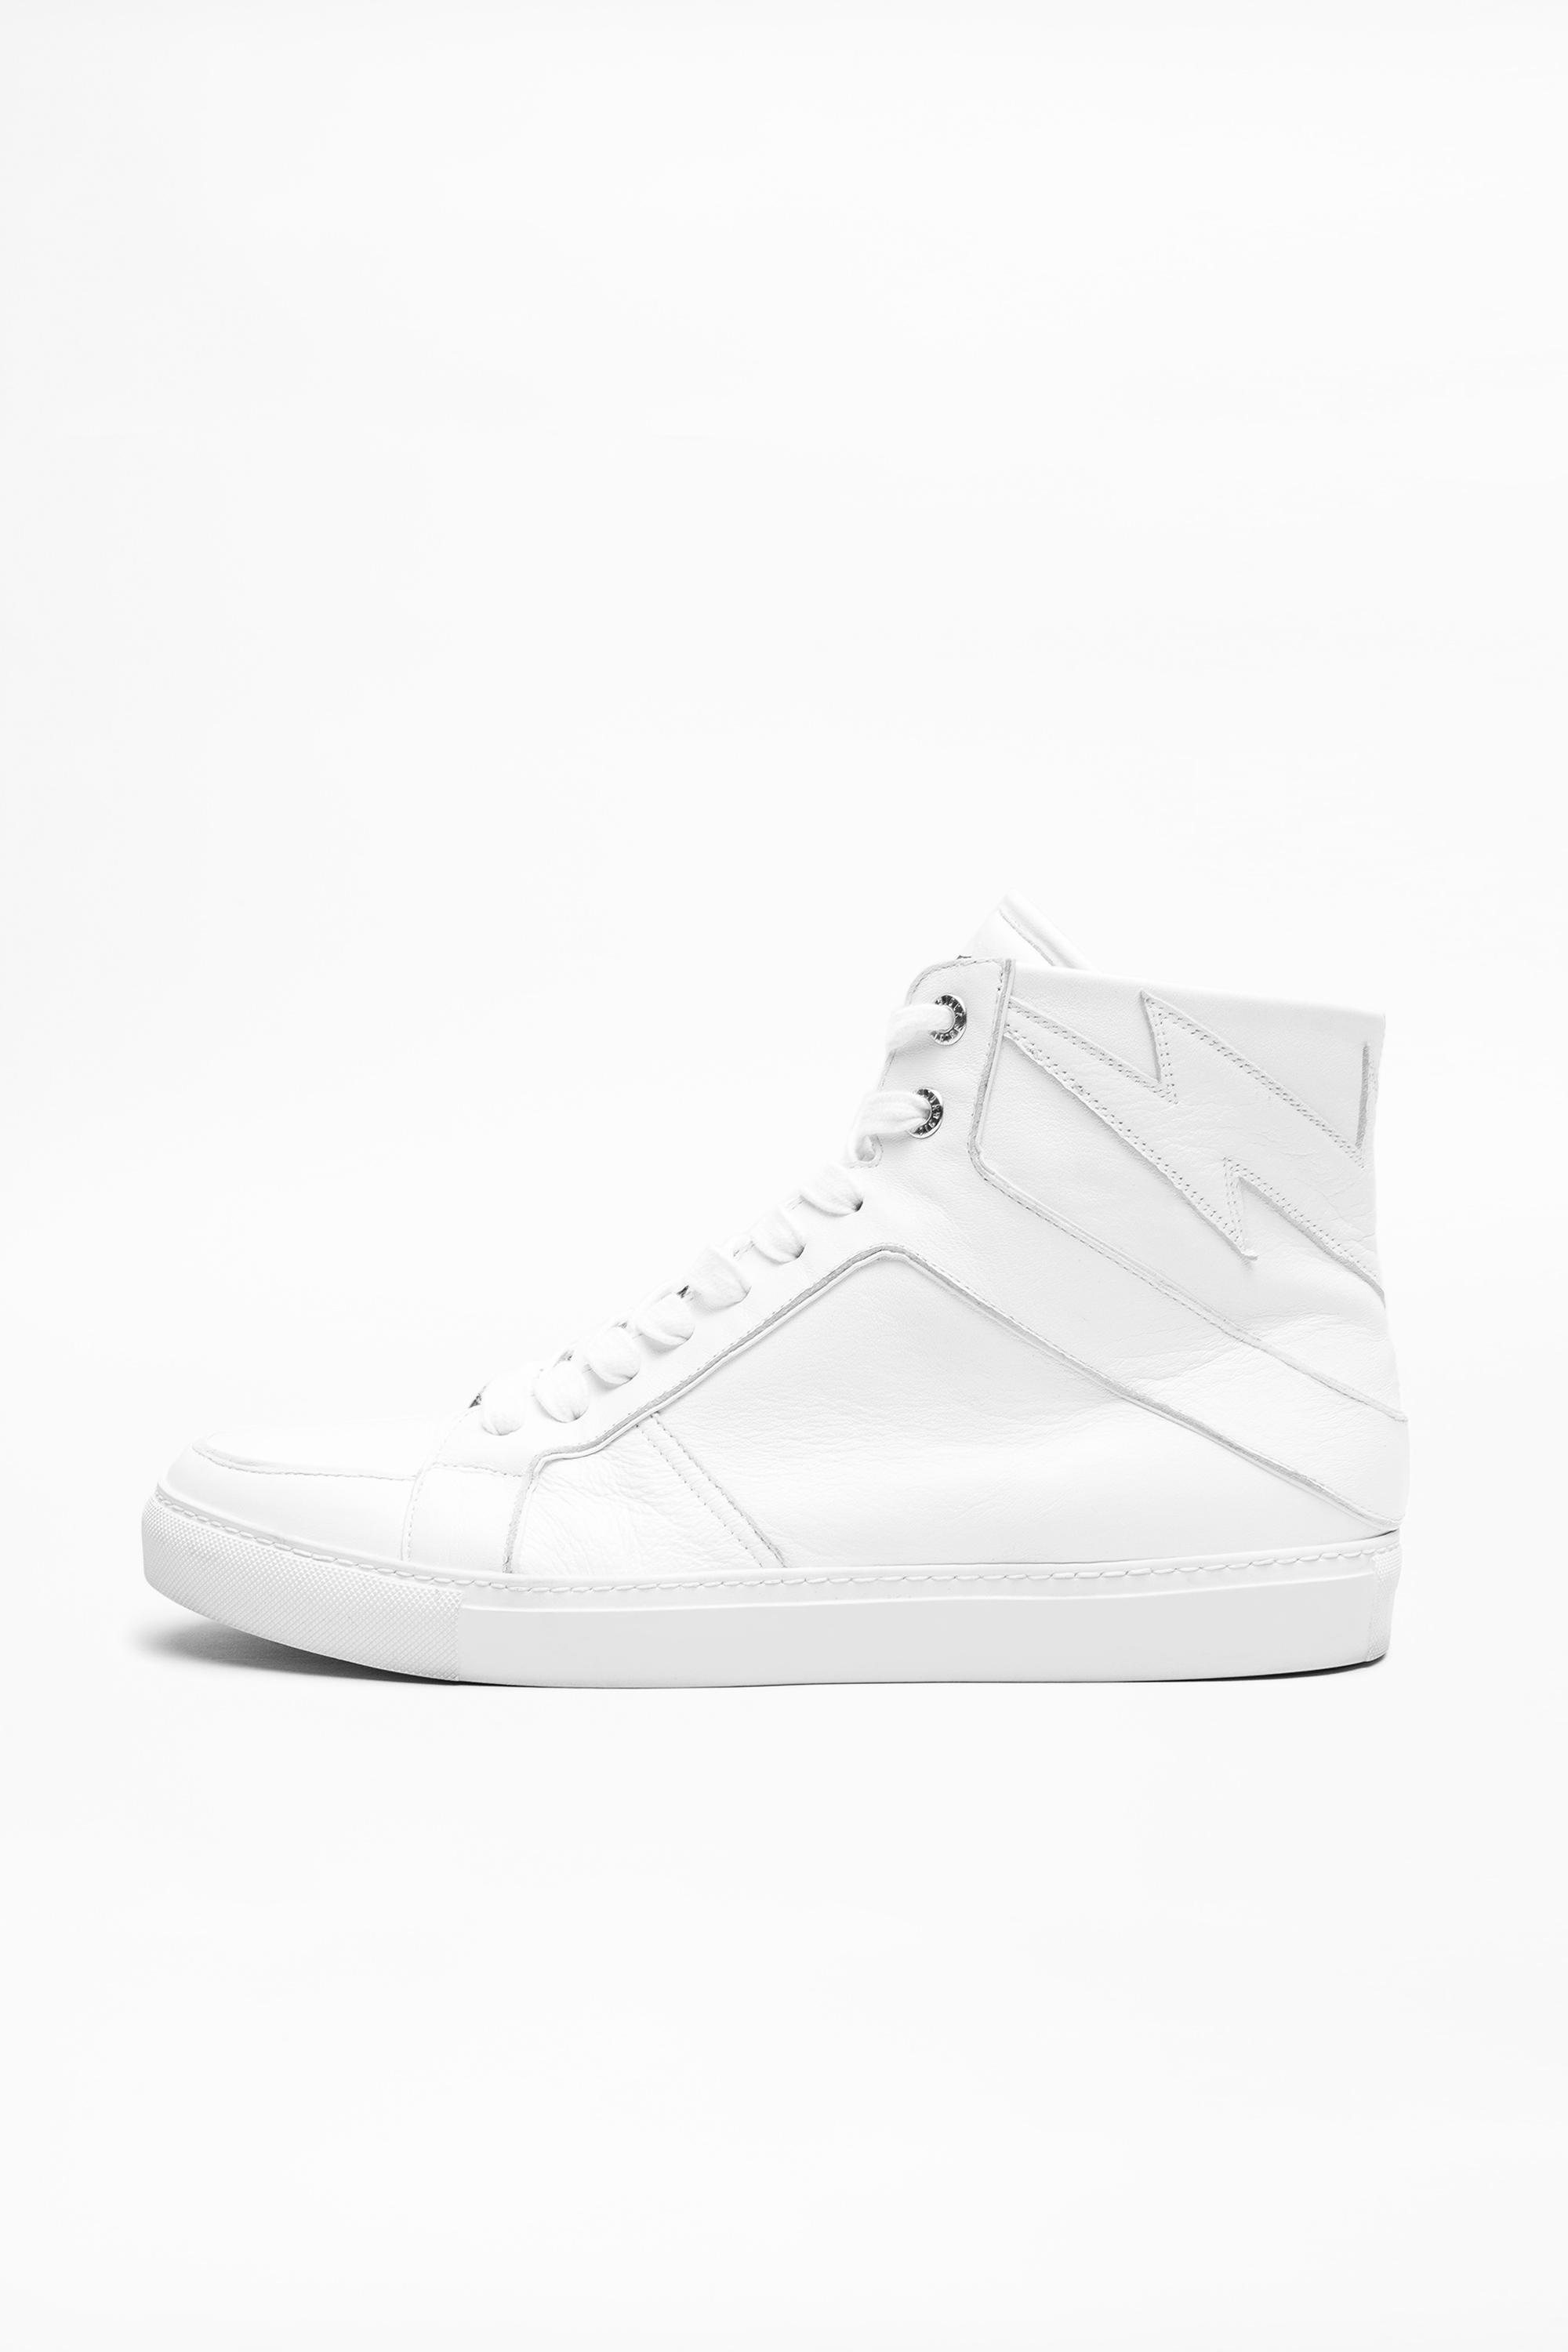 Zadig & Voltaire Leather Zv1747 High Flash Men Sneakers in White for ...